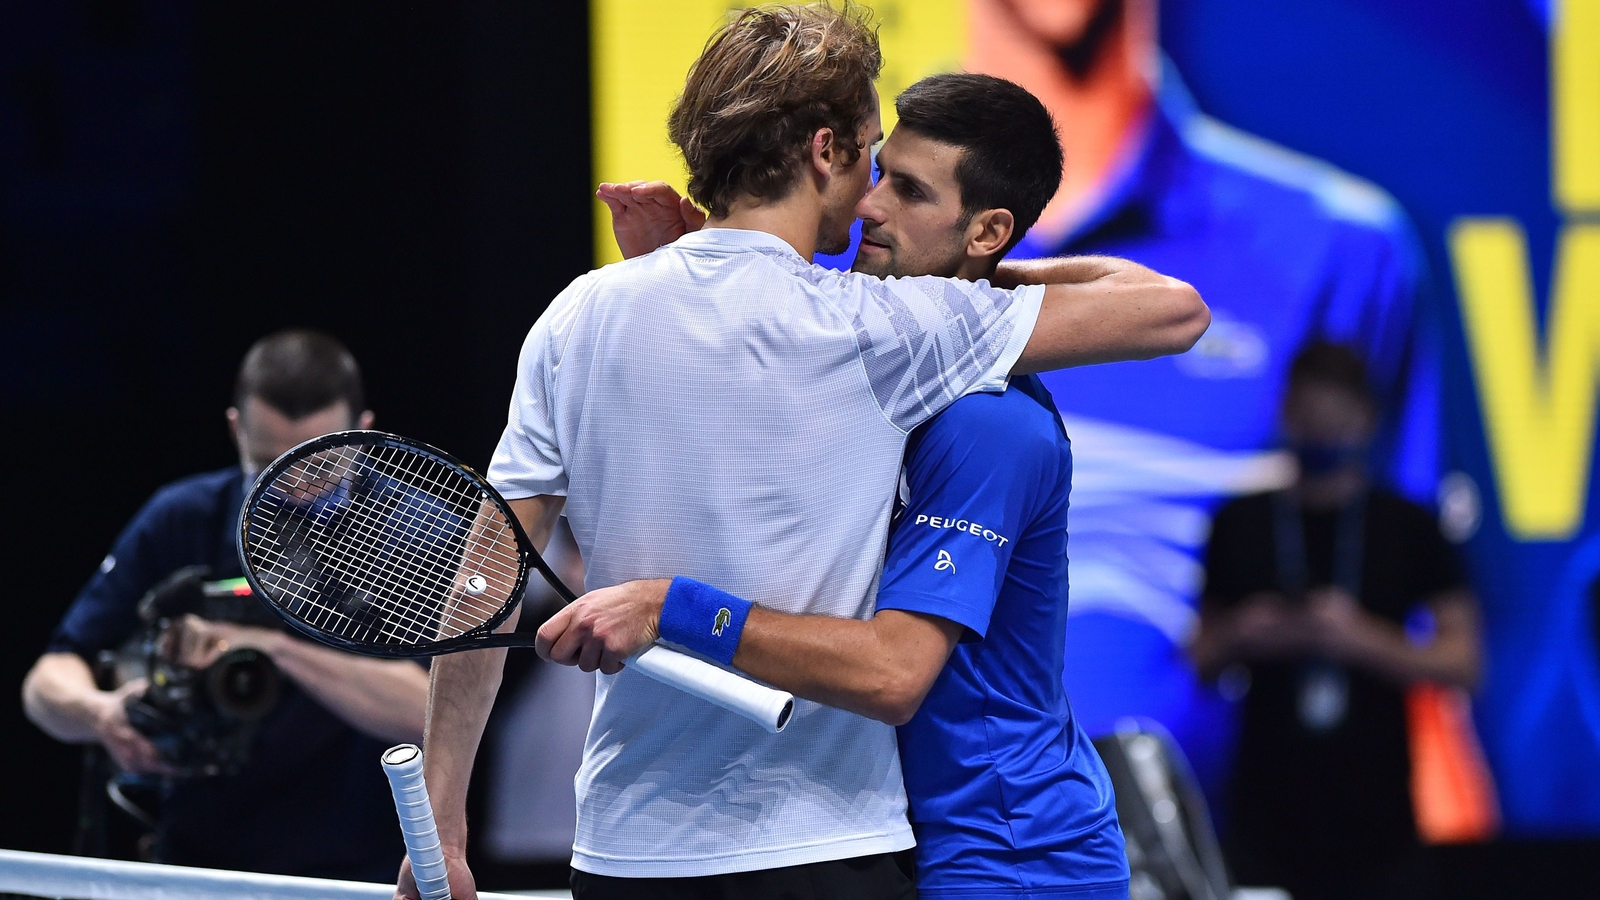 EVERY point from Djokovic & Thiem's five tiebreaks at the Nitto